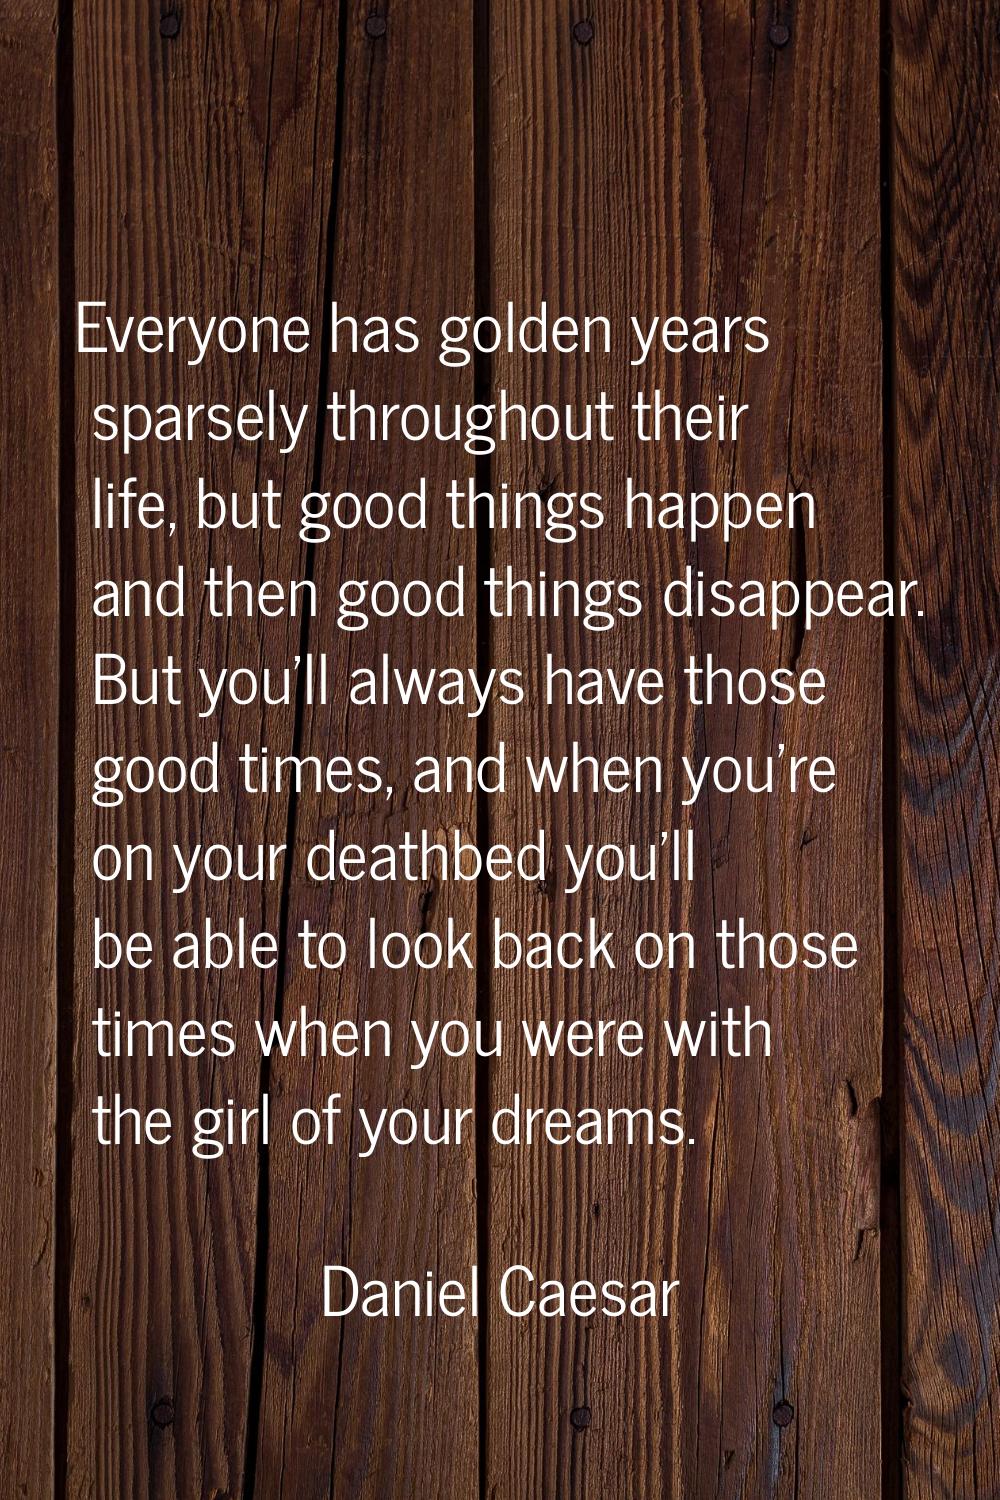 Everyone has golden years sparsely throughout their life, but good things happen and then good thin